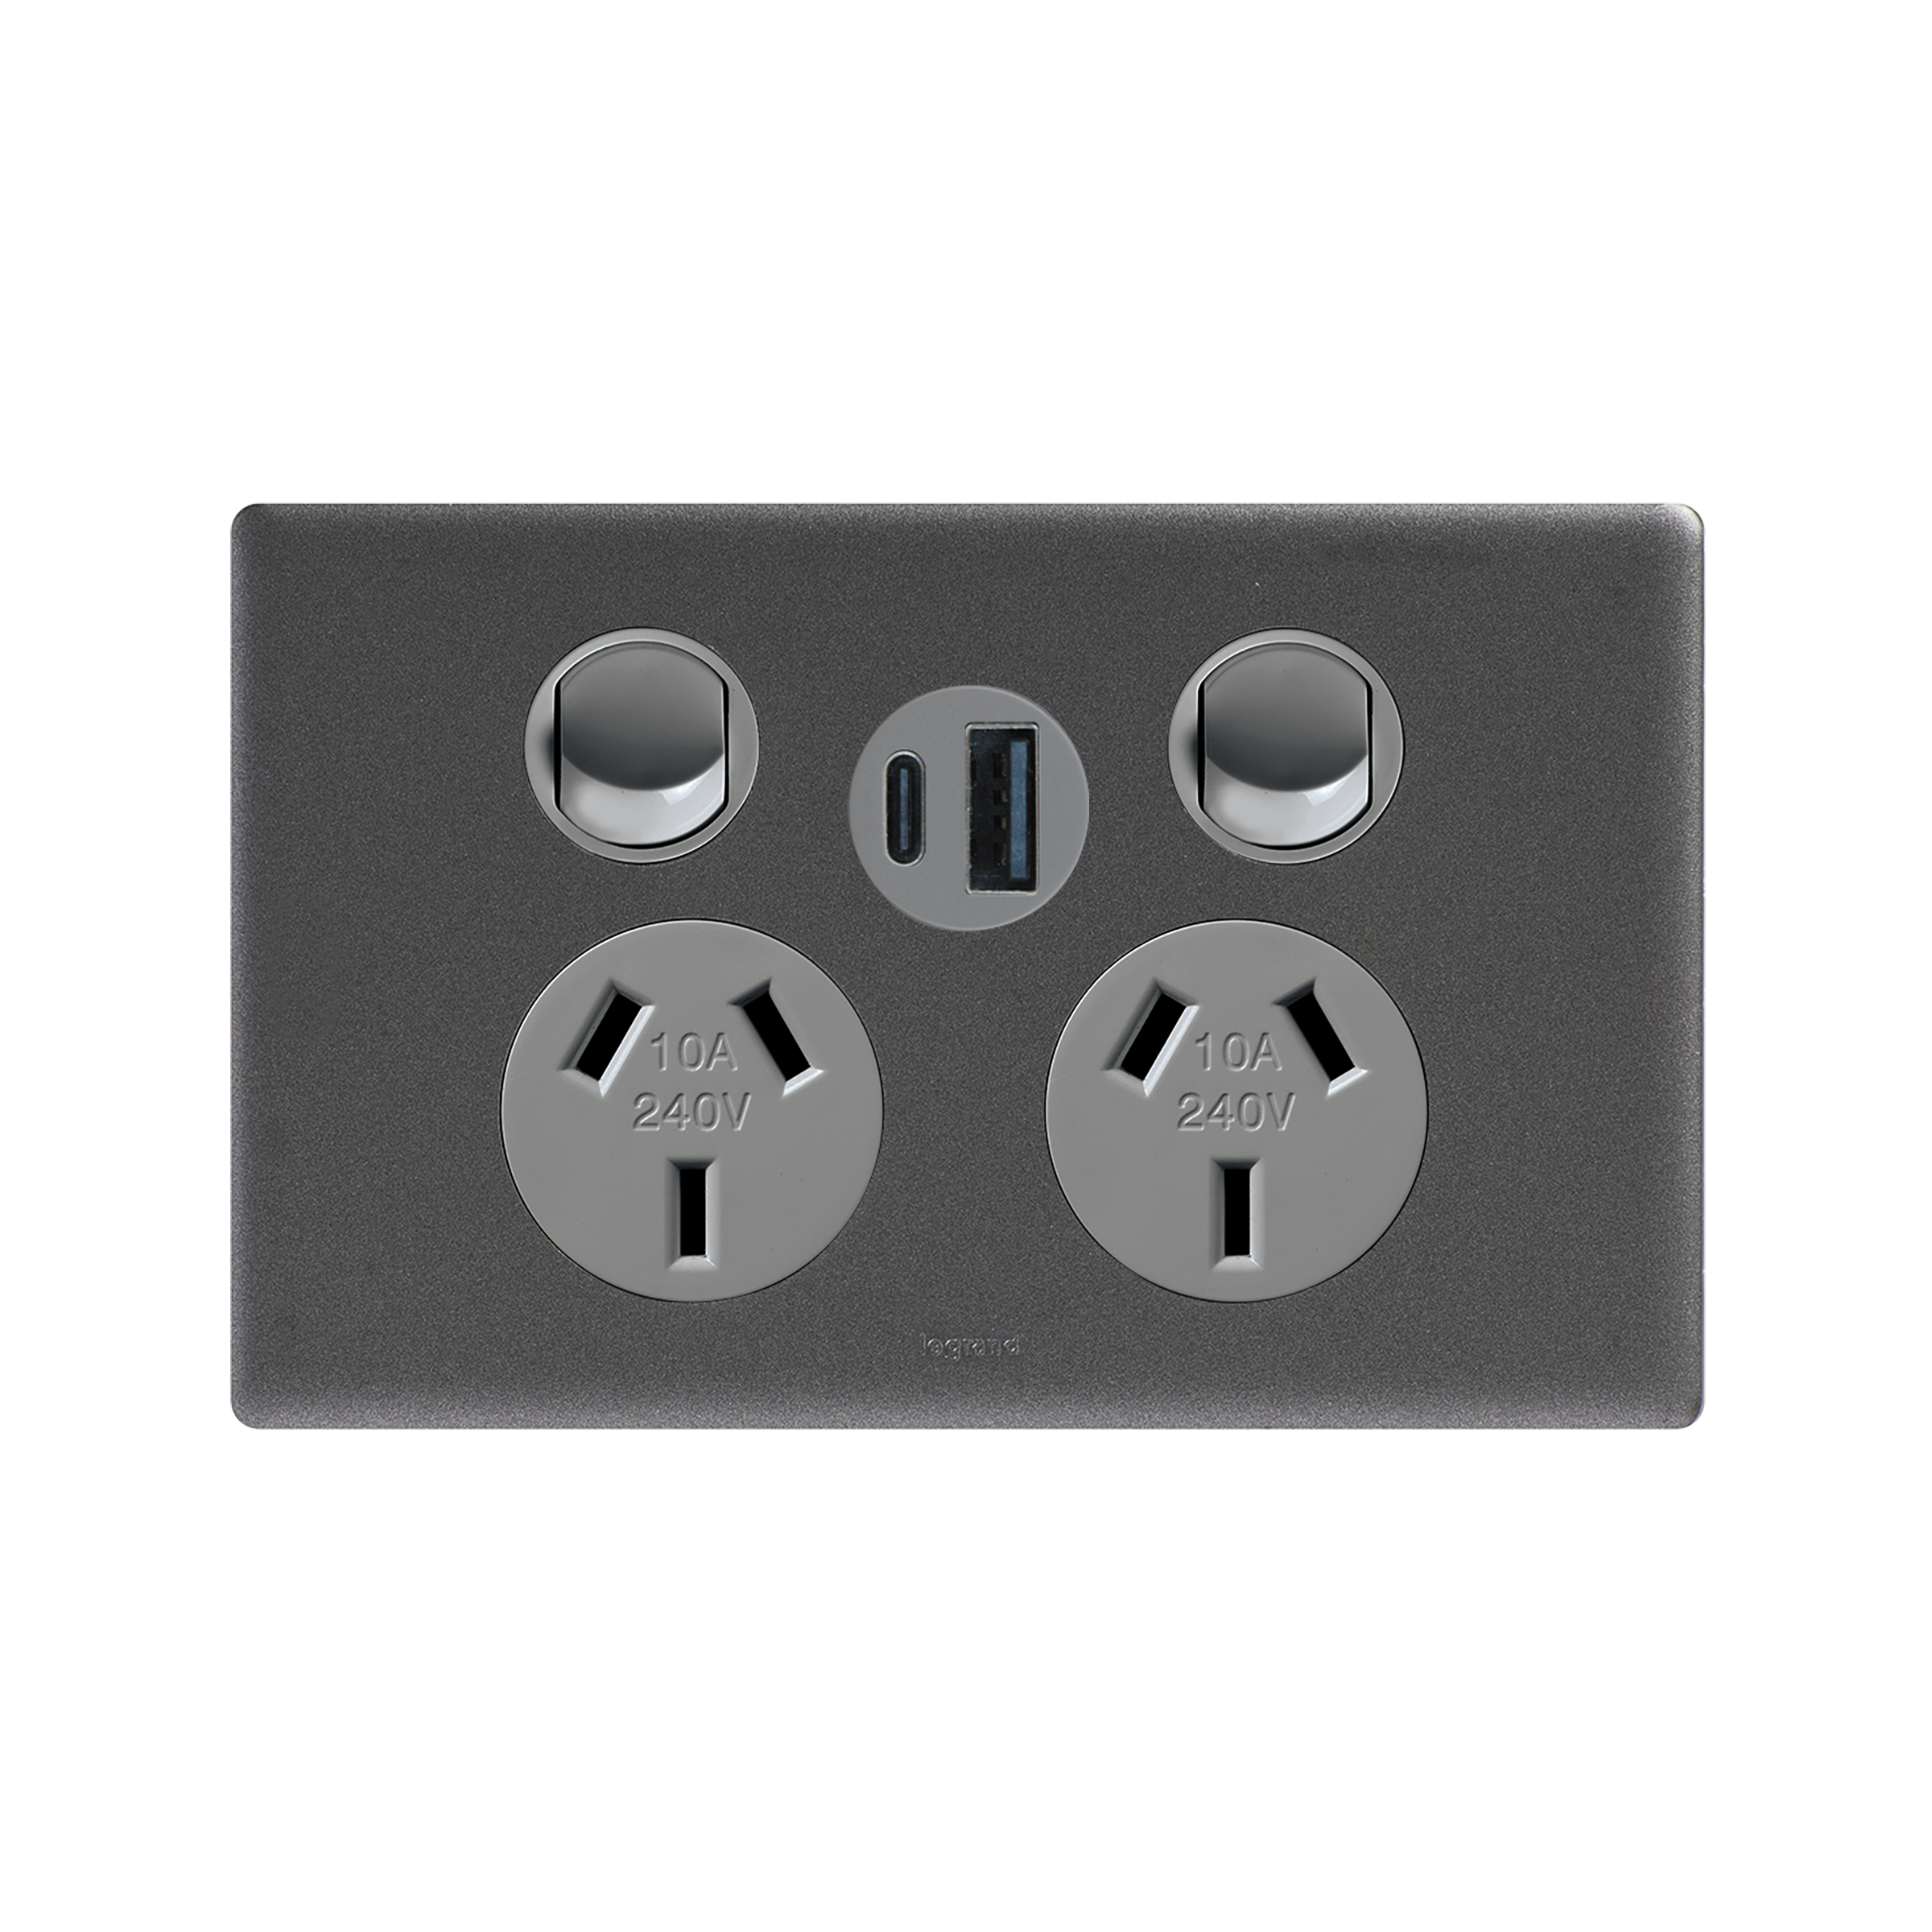 EXCEL LIFE DGPO 10A WITH USB CHARGER TYPE A+C 3A URBAN GREY